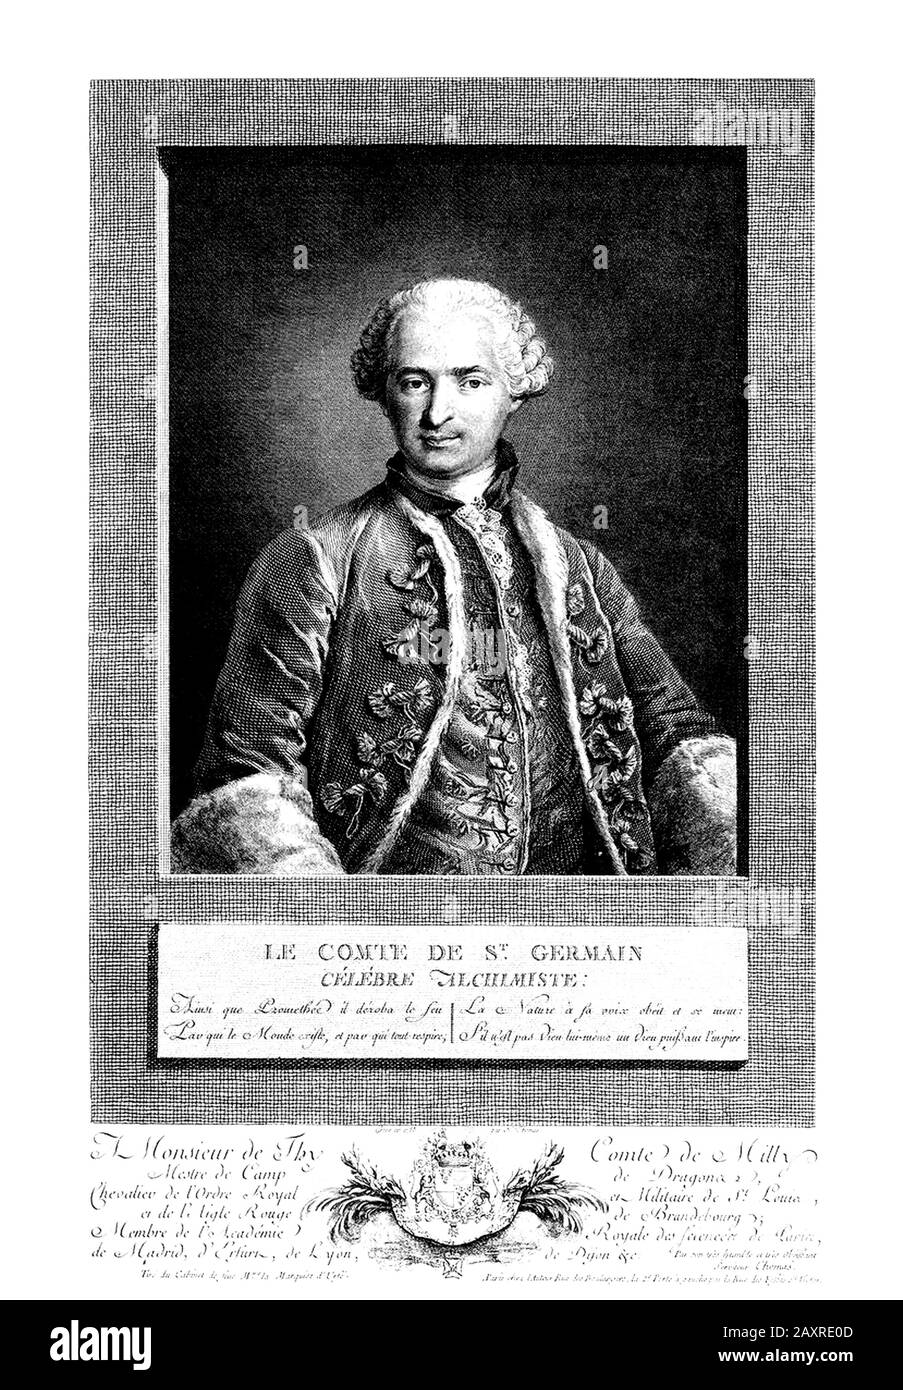 1750 ca, FRANCE : The mysterious french self-titled Count de SAINT GERMAIN ( 1710 ca - 1784 ), was a European adventurer, with an interest in Science , Alchemy and the Arts . Engraved portrait f by Nicolas Thomas made in 1783, after a painting then owned by the Marquise d'Urfé and now lost , at time  contained at the Louvre galleries in France . - ALCHIMISTA - ALCHIMIA - ALCHIMISMO - Conte - Elisir di lunga vita - OCCULTO - OCCULTISTA - OCCULTISMO - OCCULT - OCCULTISM - MISTERO - MYSTERY - HISTORY - FOTO STORICHE - Magia - Magic - MAGO - portait - ritratto - engraving - incisione - parrucca - Stock Photo